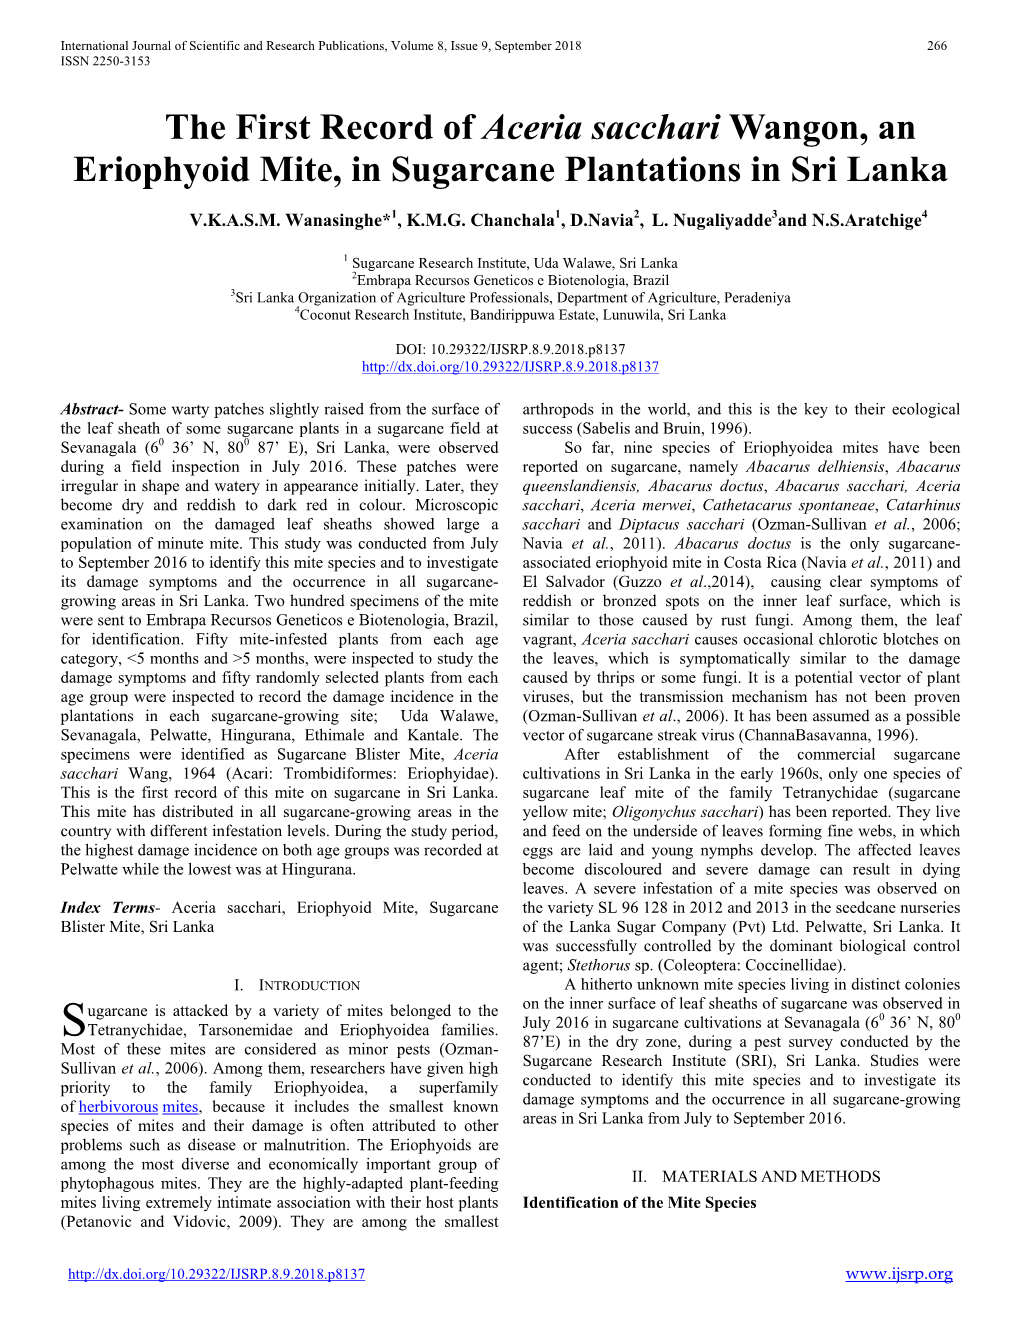 The First Record of Aceria Sacchari Wangon, an Eriophyoid Mite, in Sugarcane Plantations in Sri Lanka